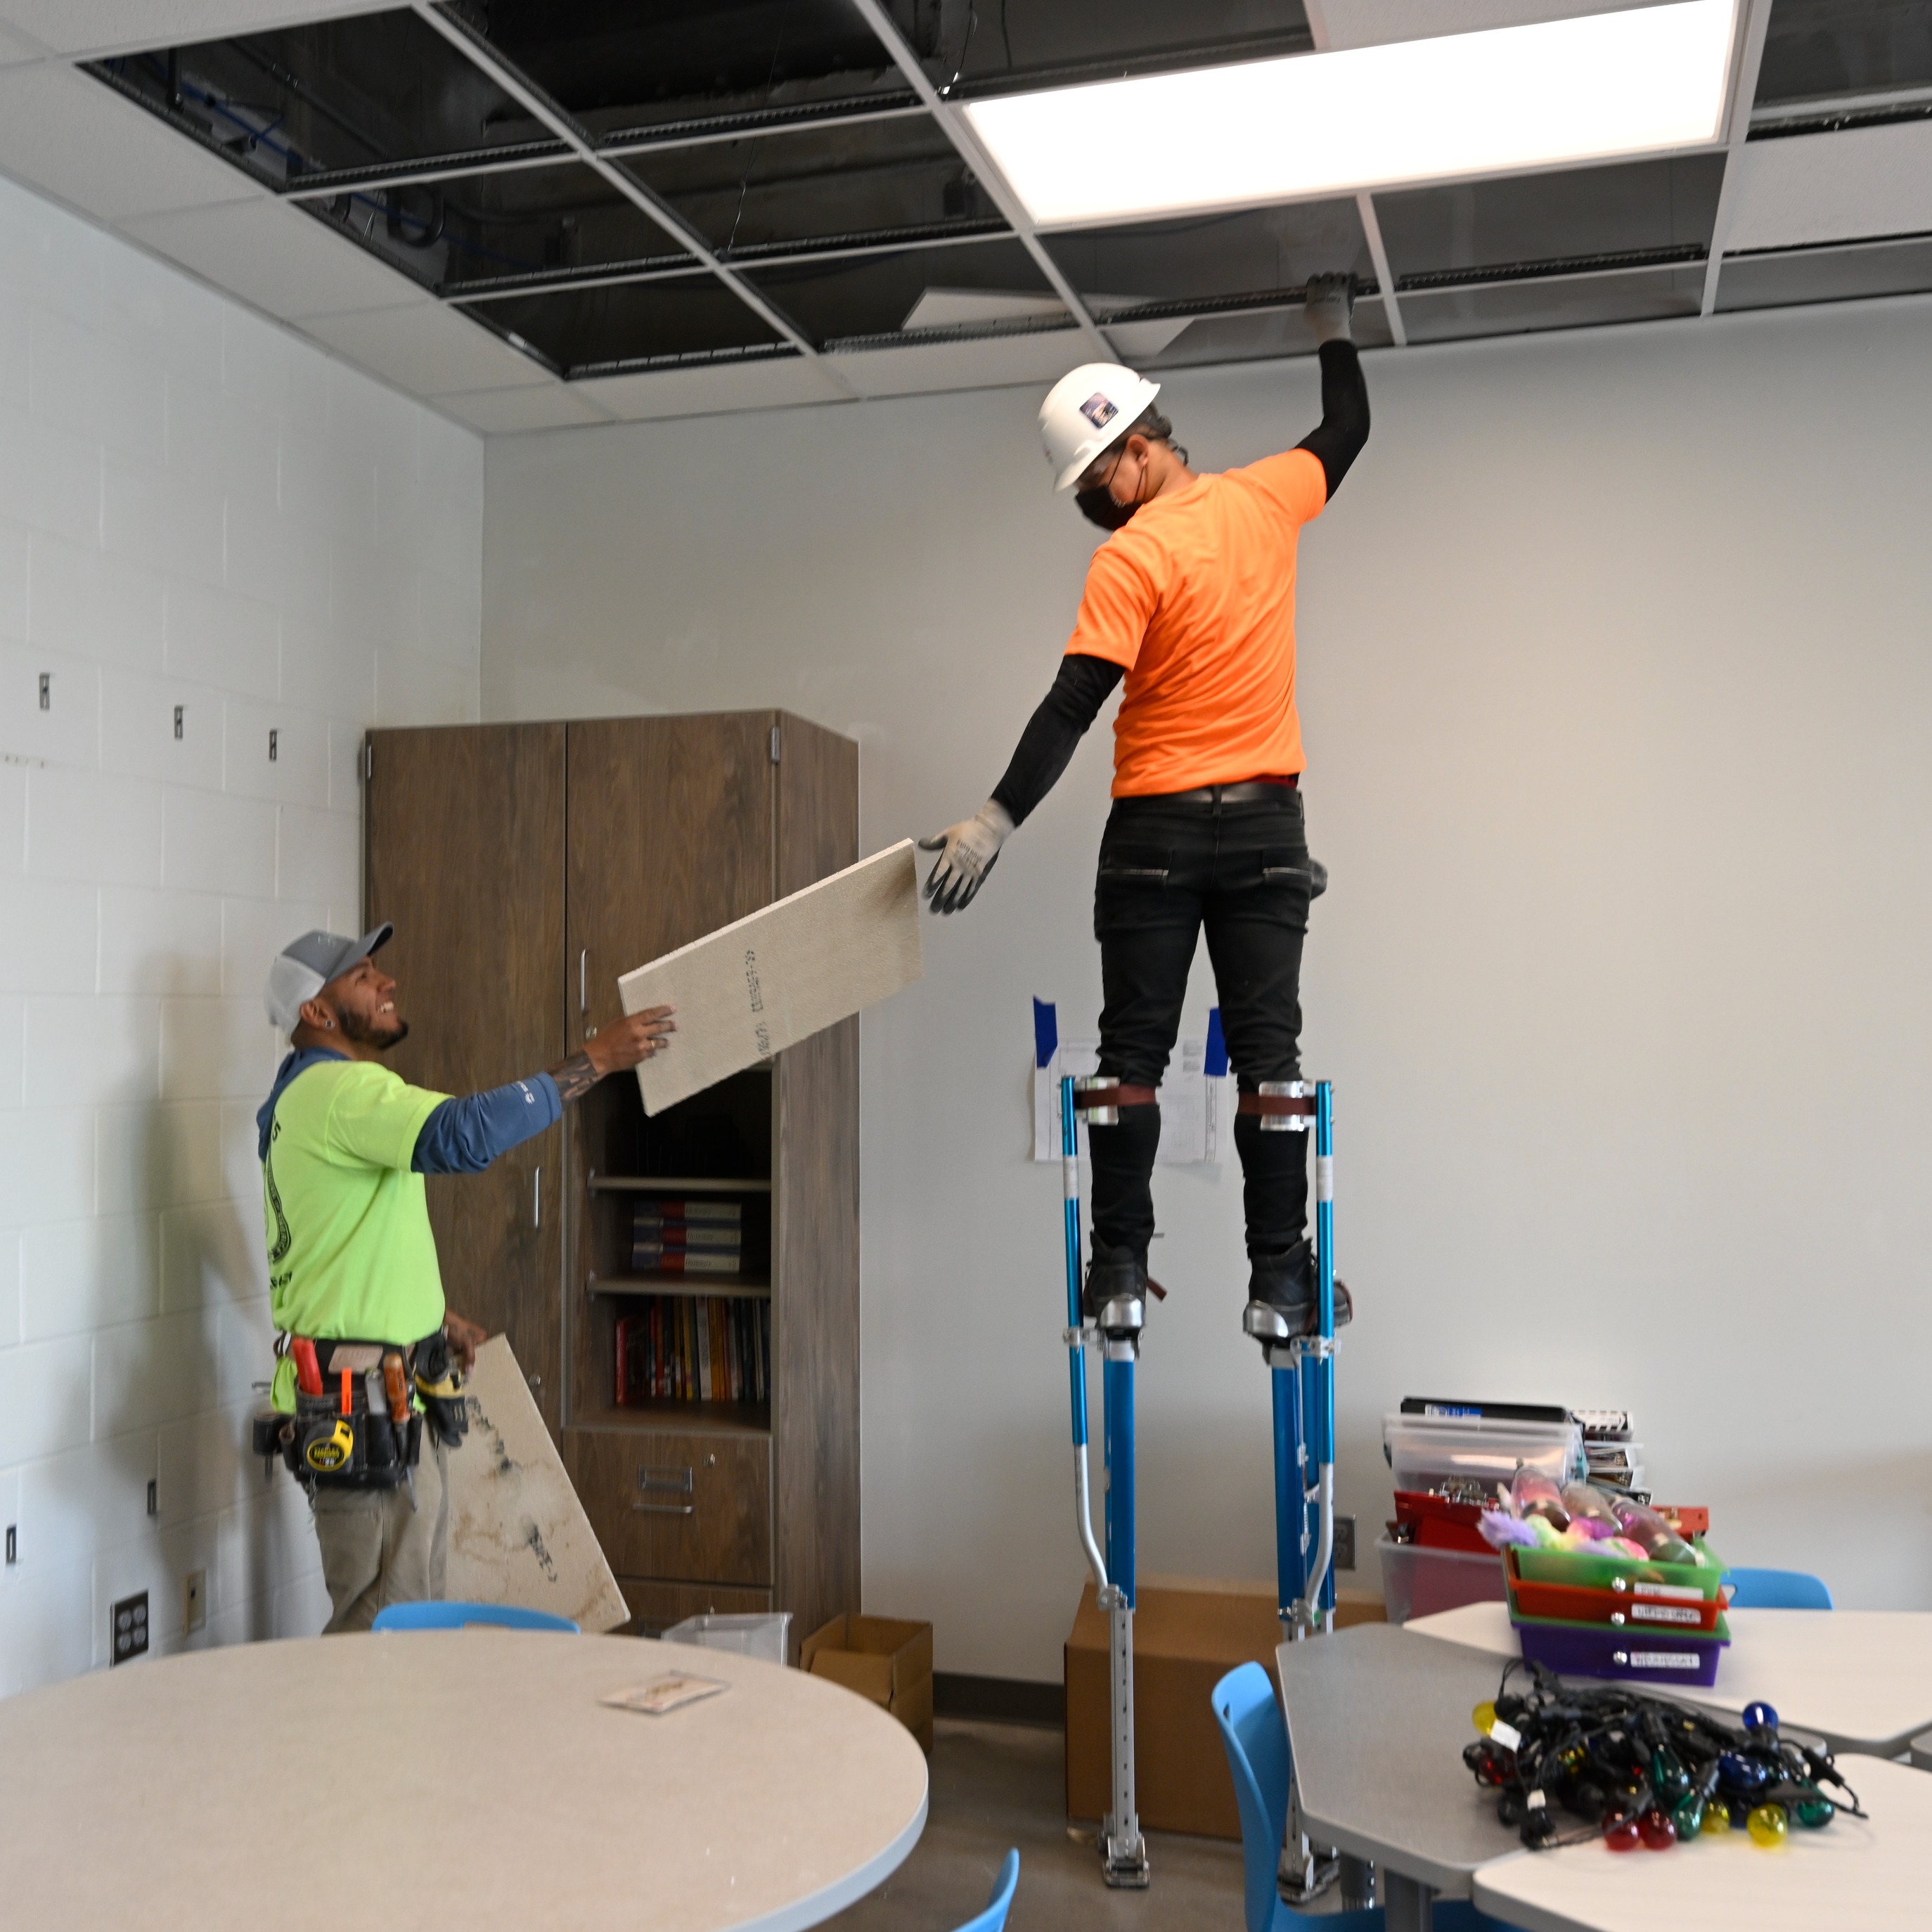 Man handing another man on stilts ceiling tile to install